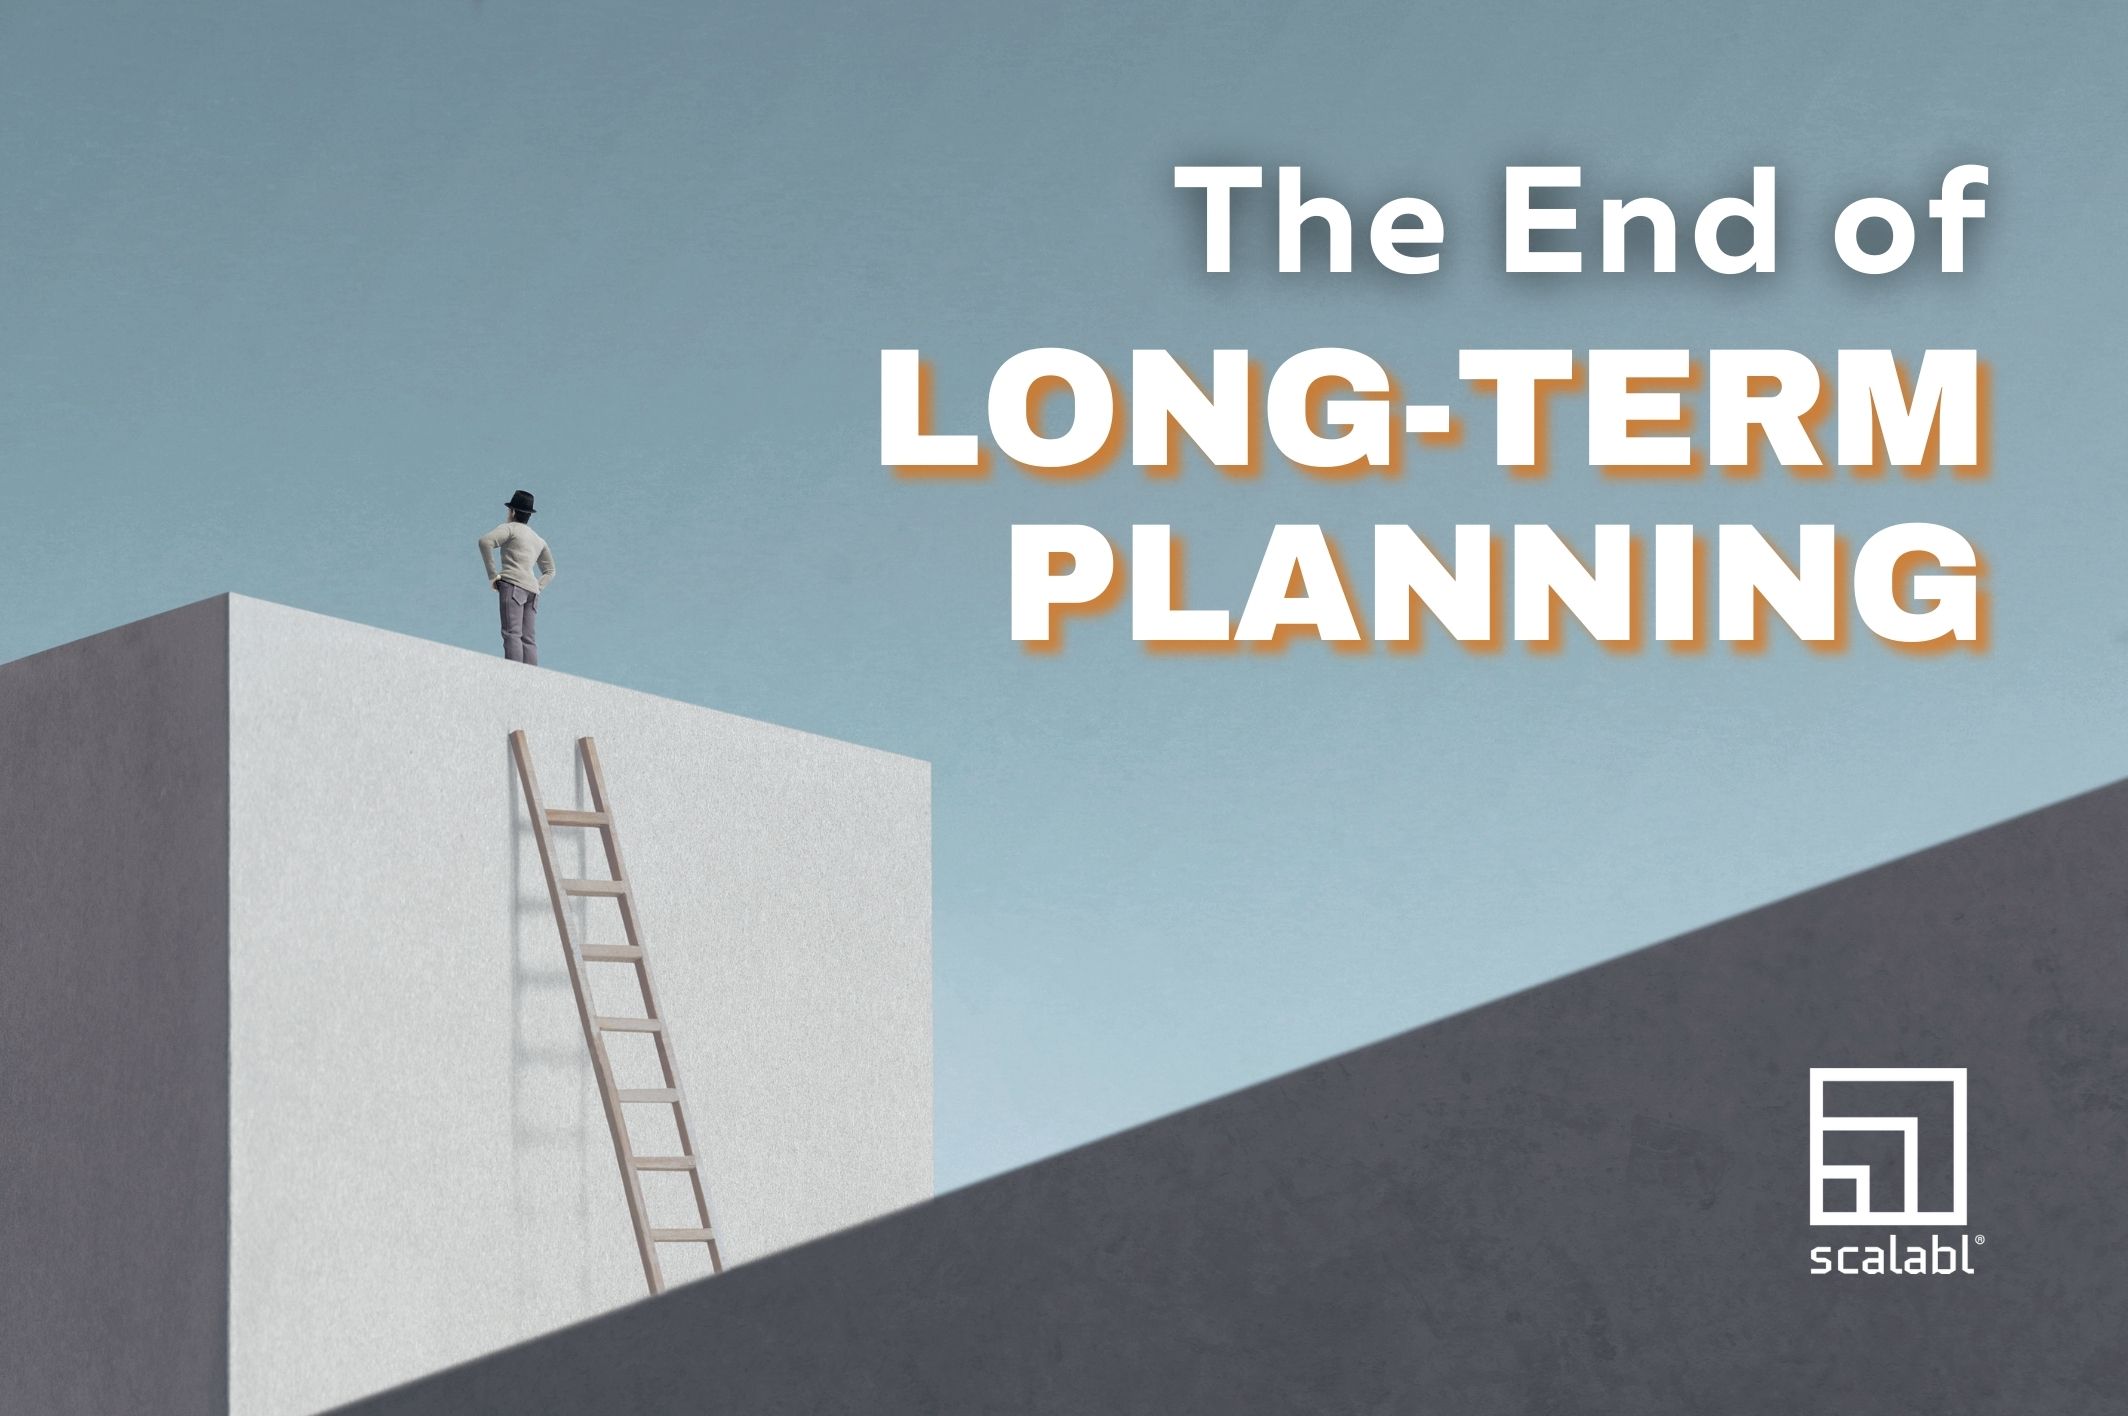 The End of Long-Term Planning